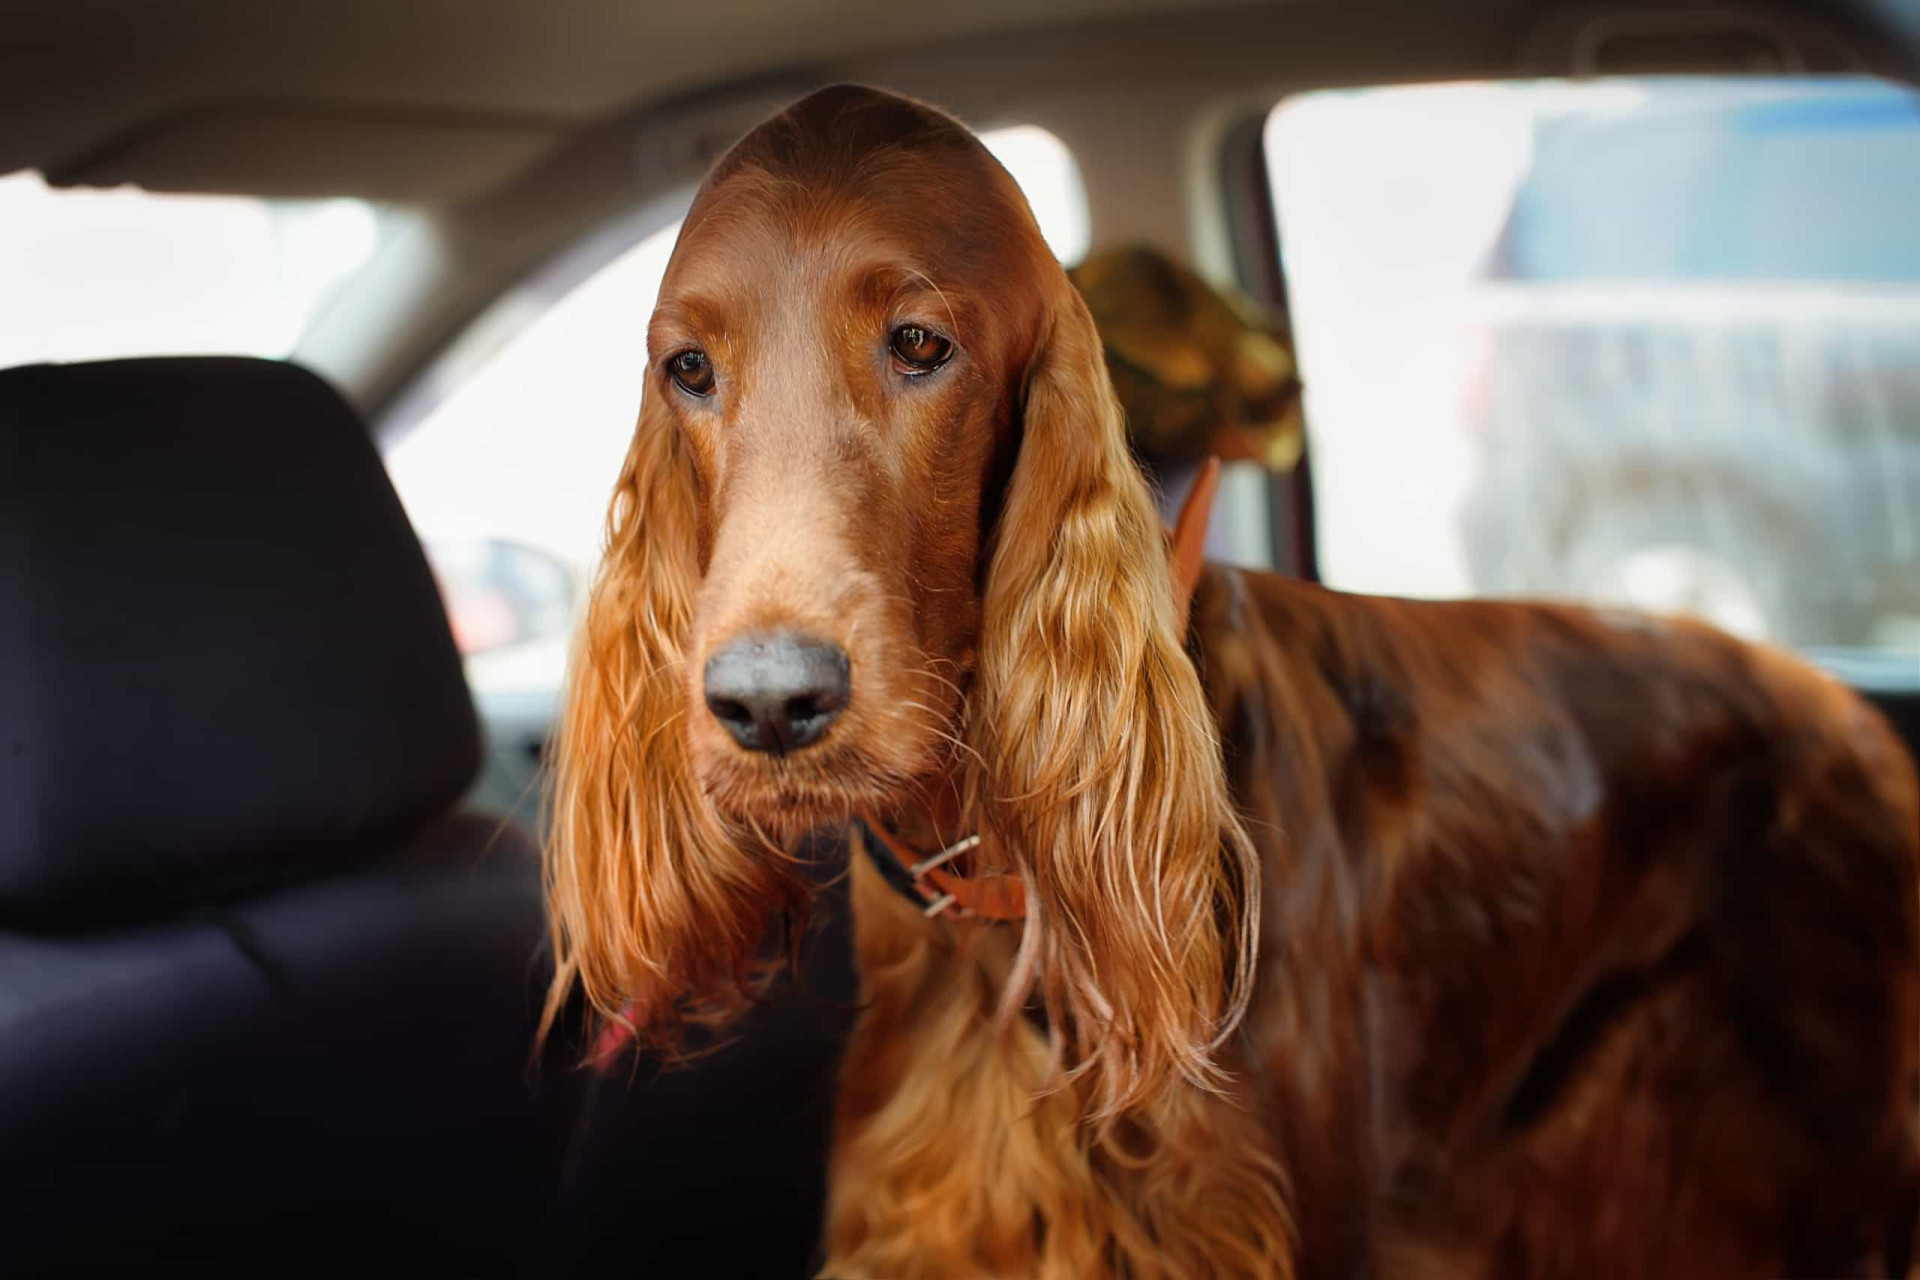 <p>Some dogs get over it with a few rides, but others not so much. If this is the case, you will need to go to the vet and get some motion sickness meds. It’s advisable to try them before you go on the road trip.</p><p><a href="https://www.msn.com/en-us/community/channel/vid-7xx8mnucu55yw63we9va2gwr7uihbxwc68fxqp25x6tg4ftibpra?cvid=94631541bc0f4f89bfd59158d696ad7e">Follow us and access great exclusive content every day</a></p>